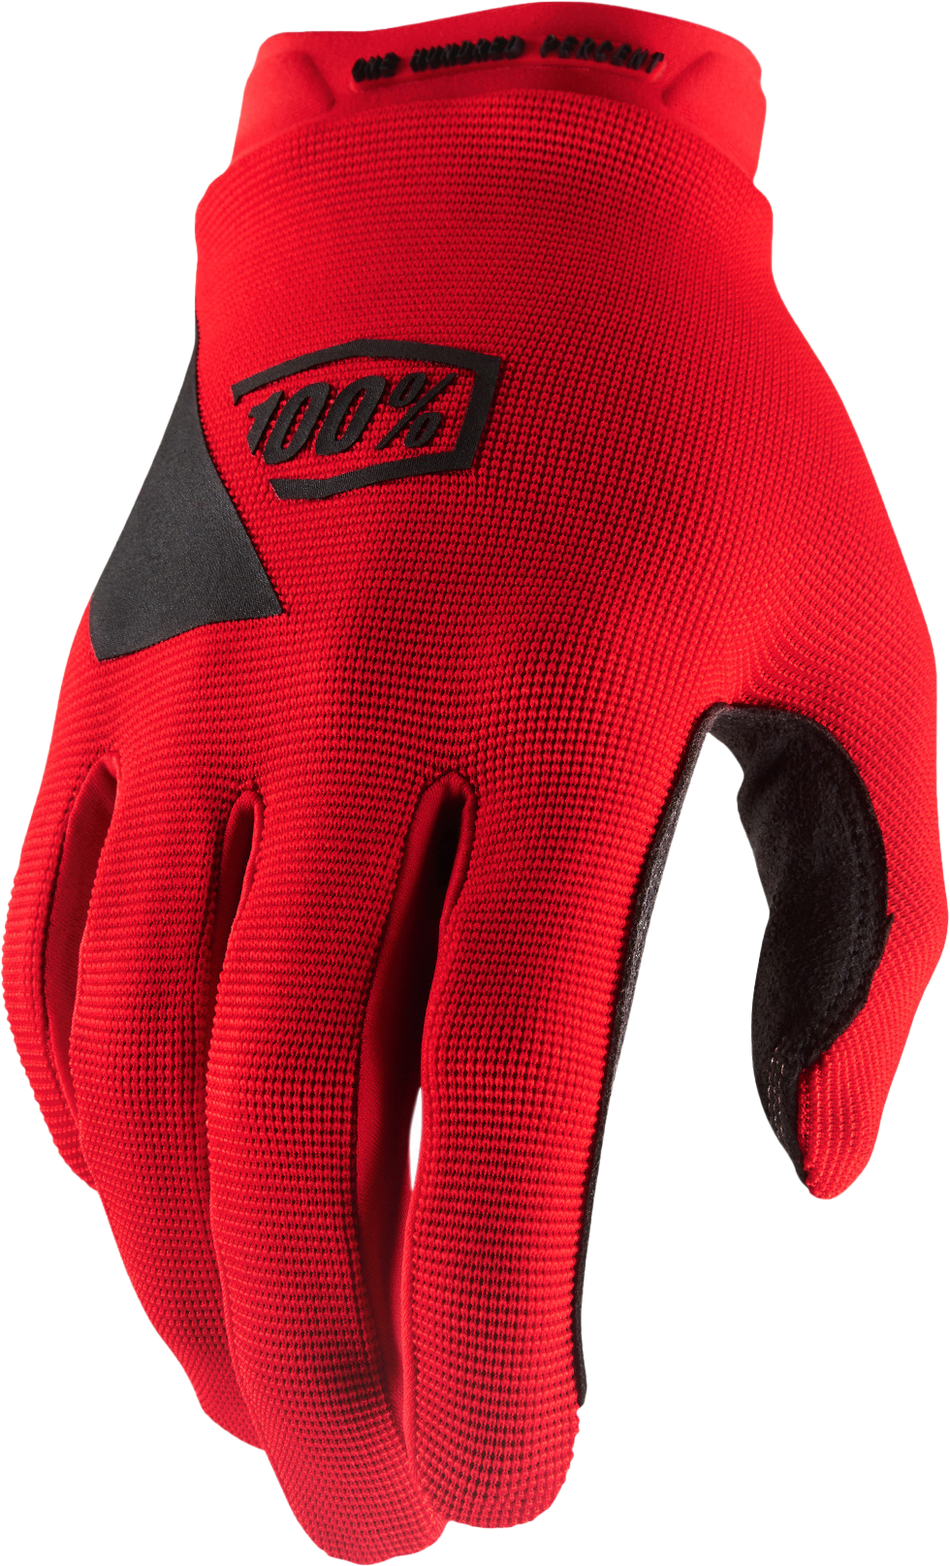 100% Ridecamp Gloves Red 2x 10011-00024